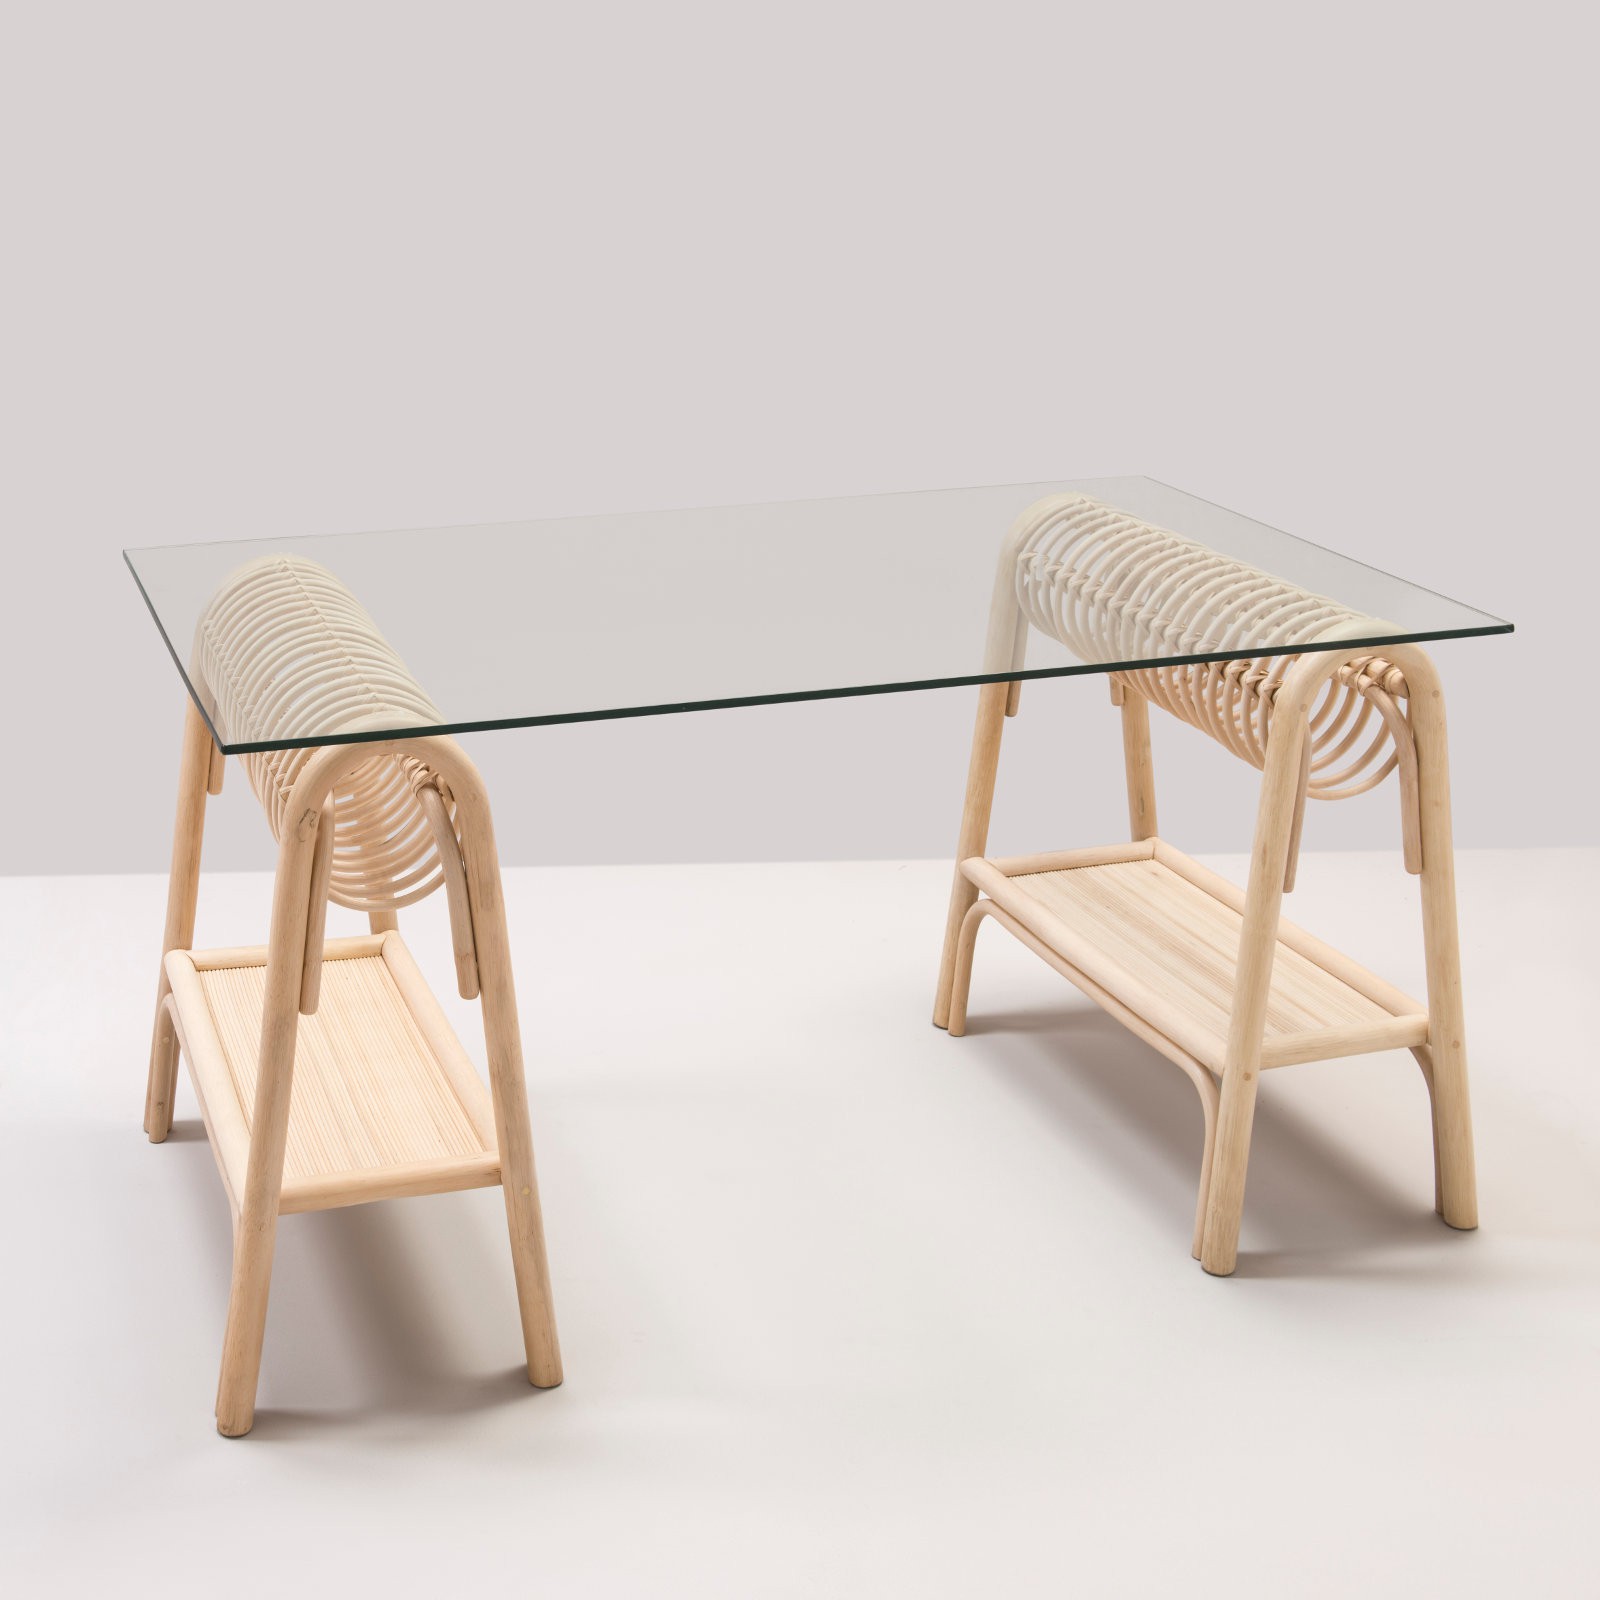 knop Chip heuvel PASSE-PASSE design rattan desk by Jean-Michel Policar with glass top